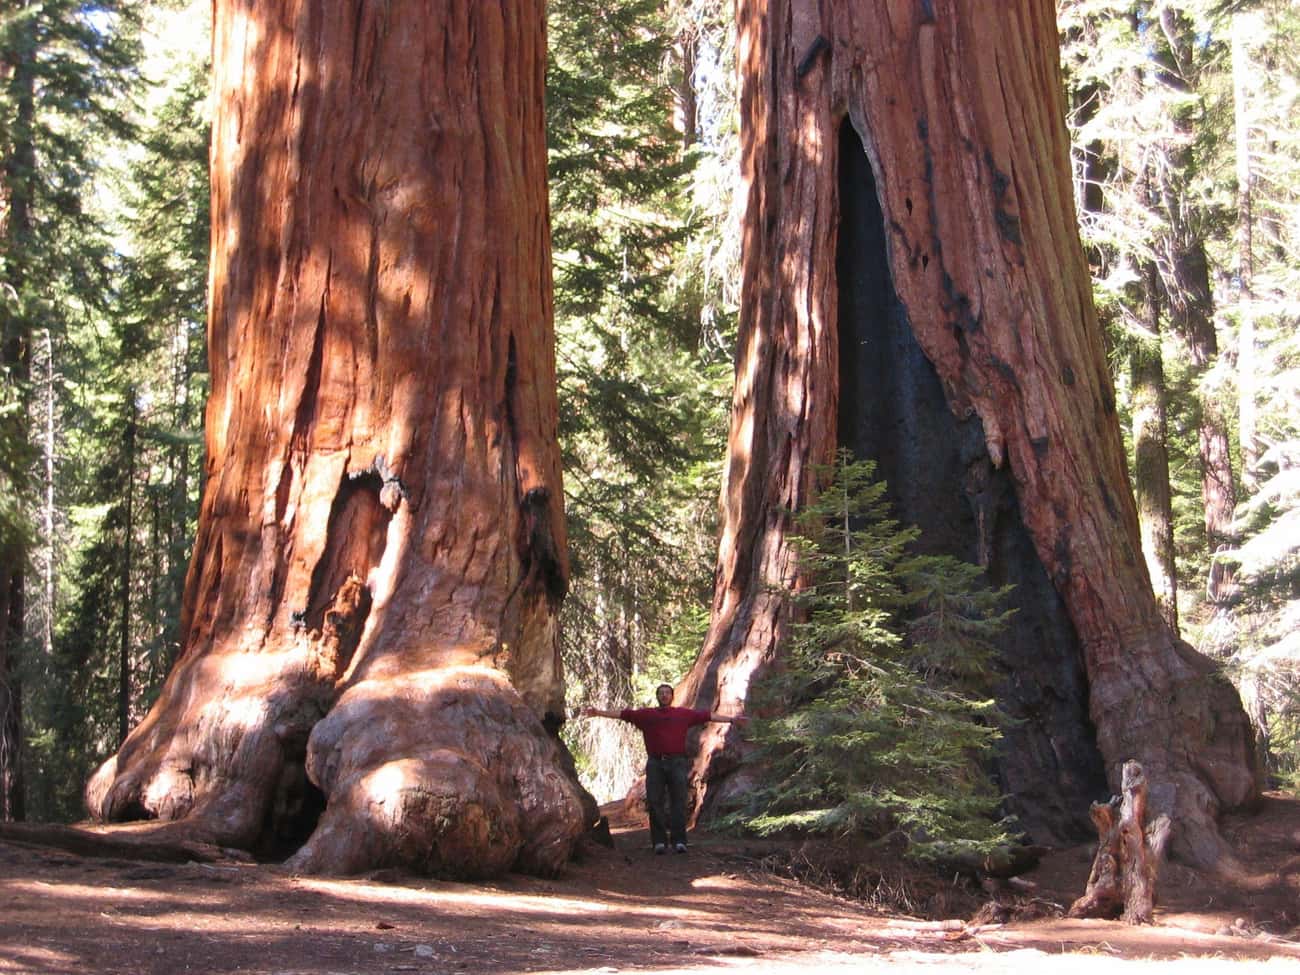 D-23, A 3,220-Year-Old Giant Sequoia